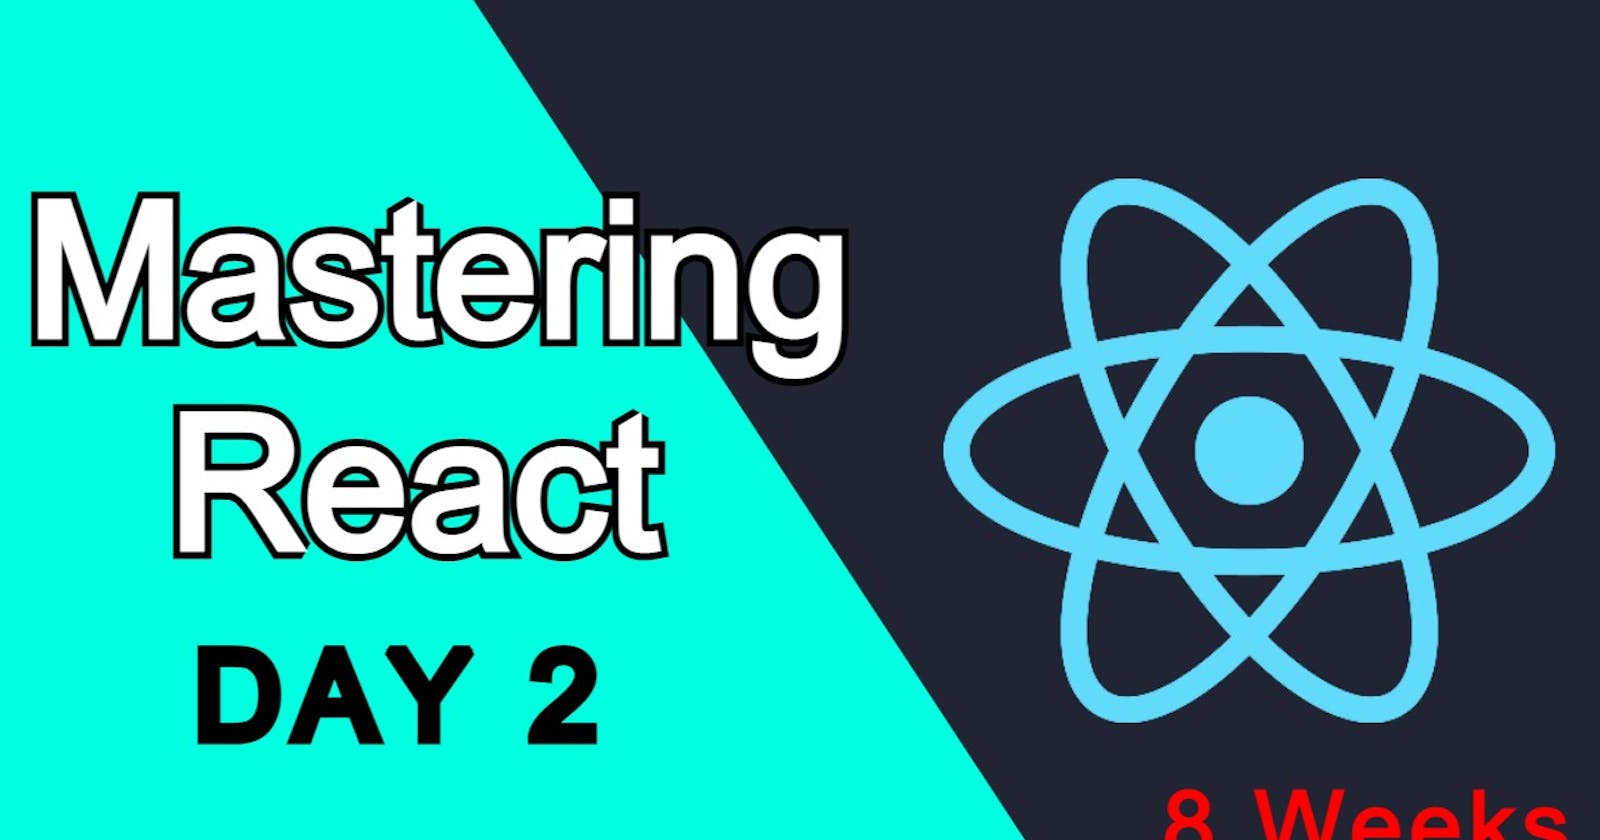 Mastering React in 8 weeks - Day 2